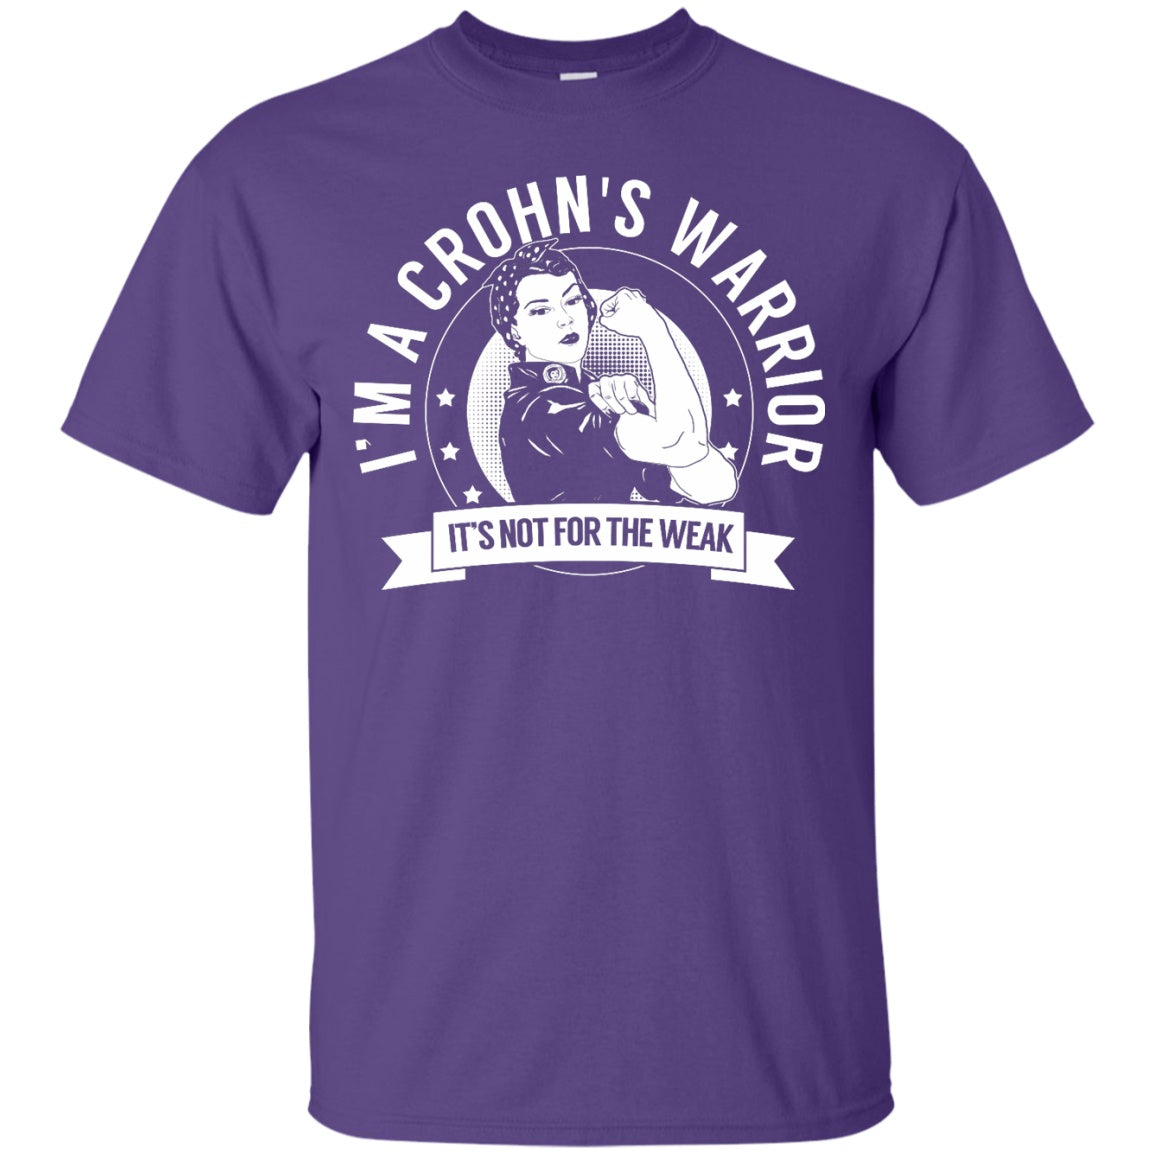 Crohn's Warrior Not For The Weak Unisex Shirt - The Unchargeables